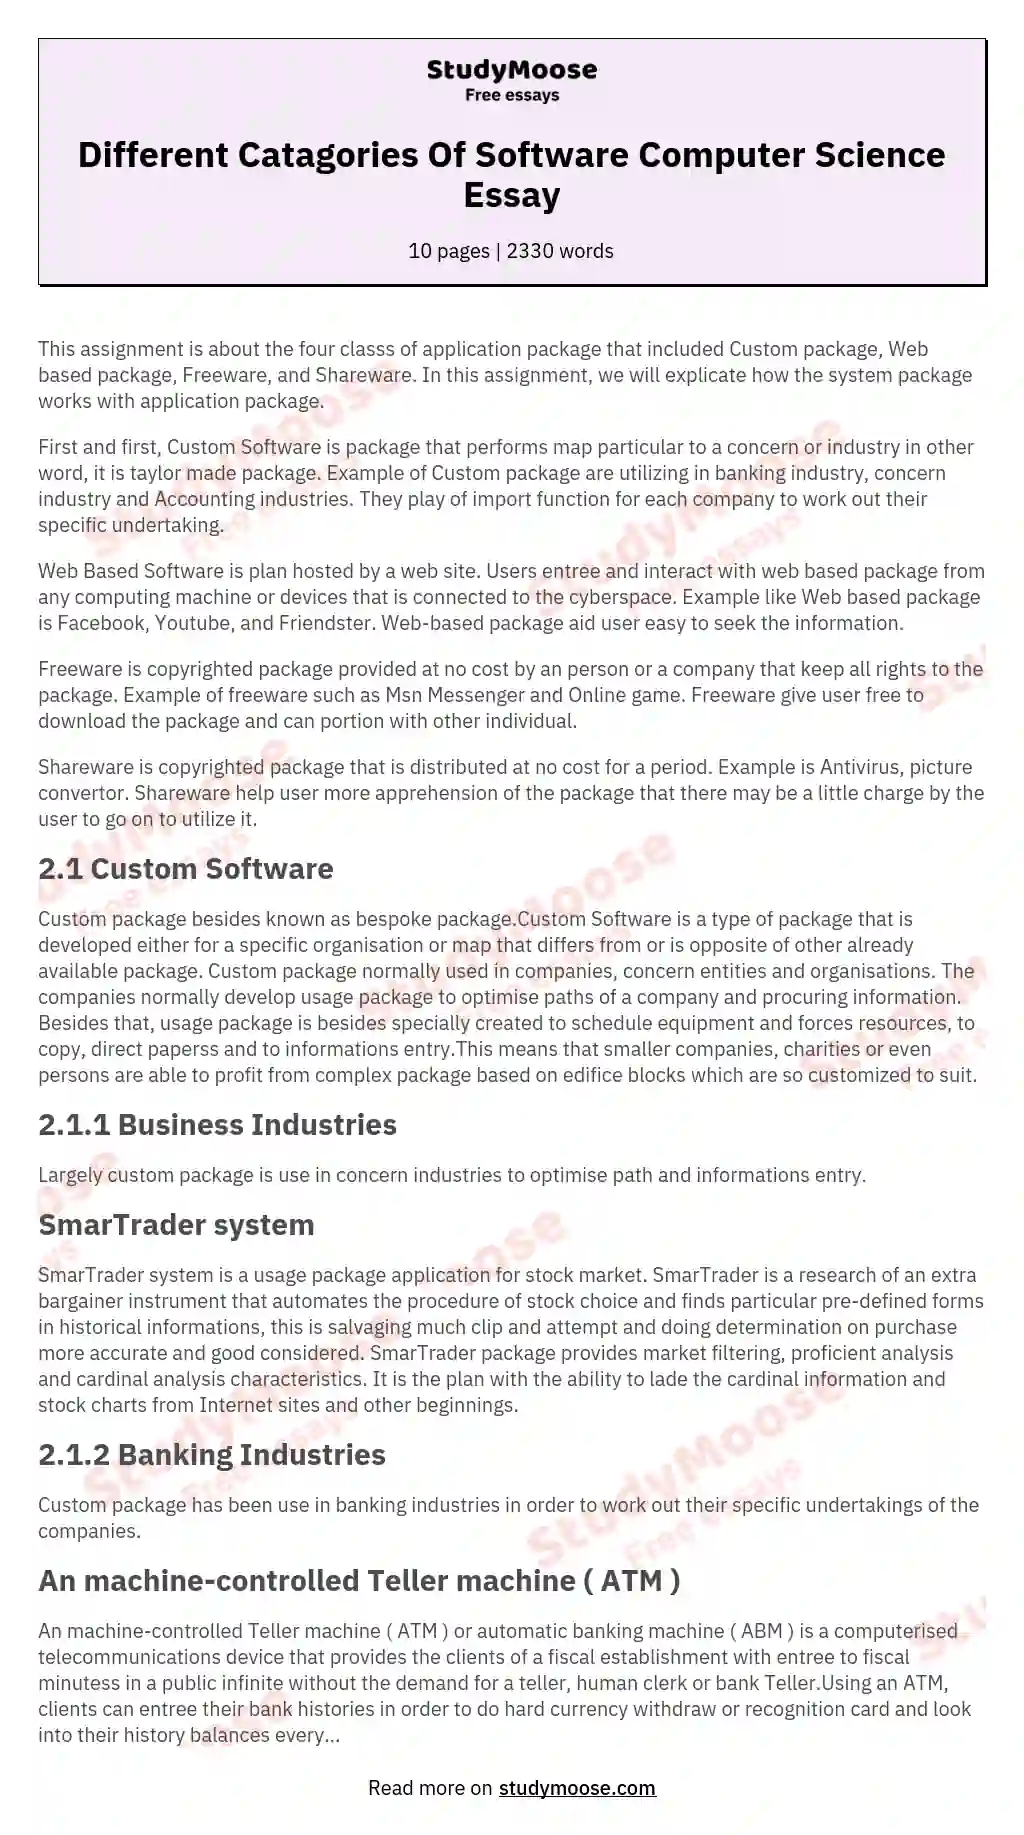 Different Catagories Of Software Computer Science Essay essay